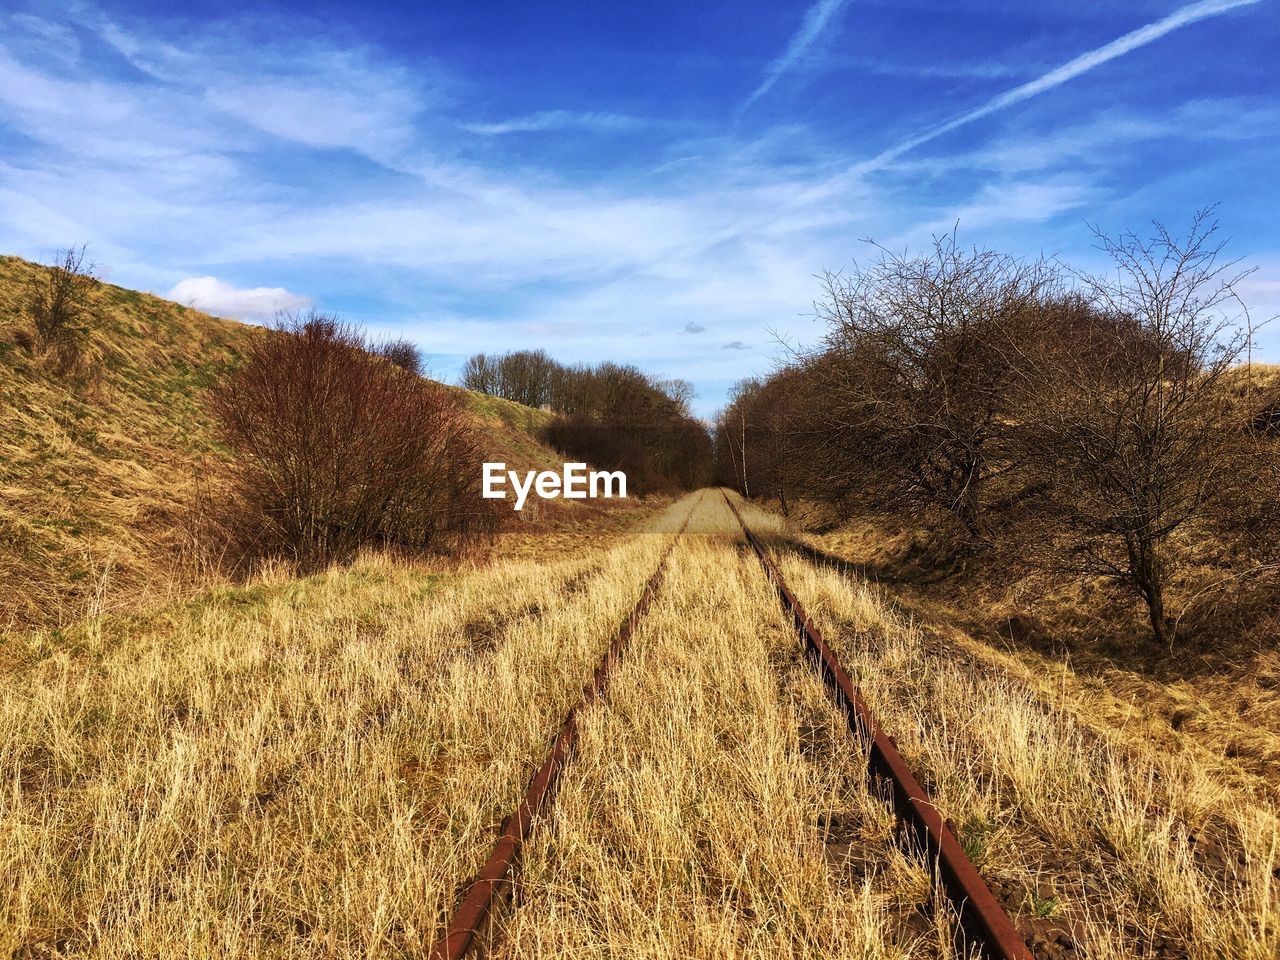 Railroad track on grassy field against blue sky